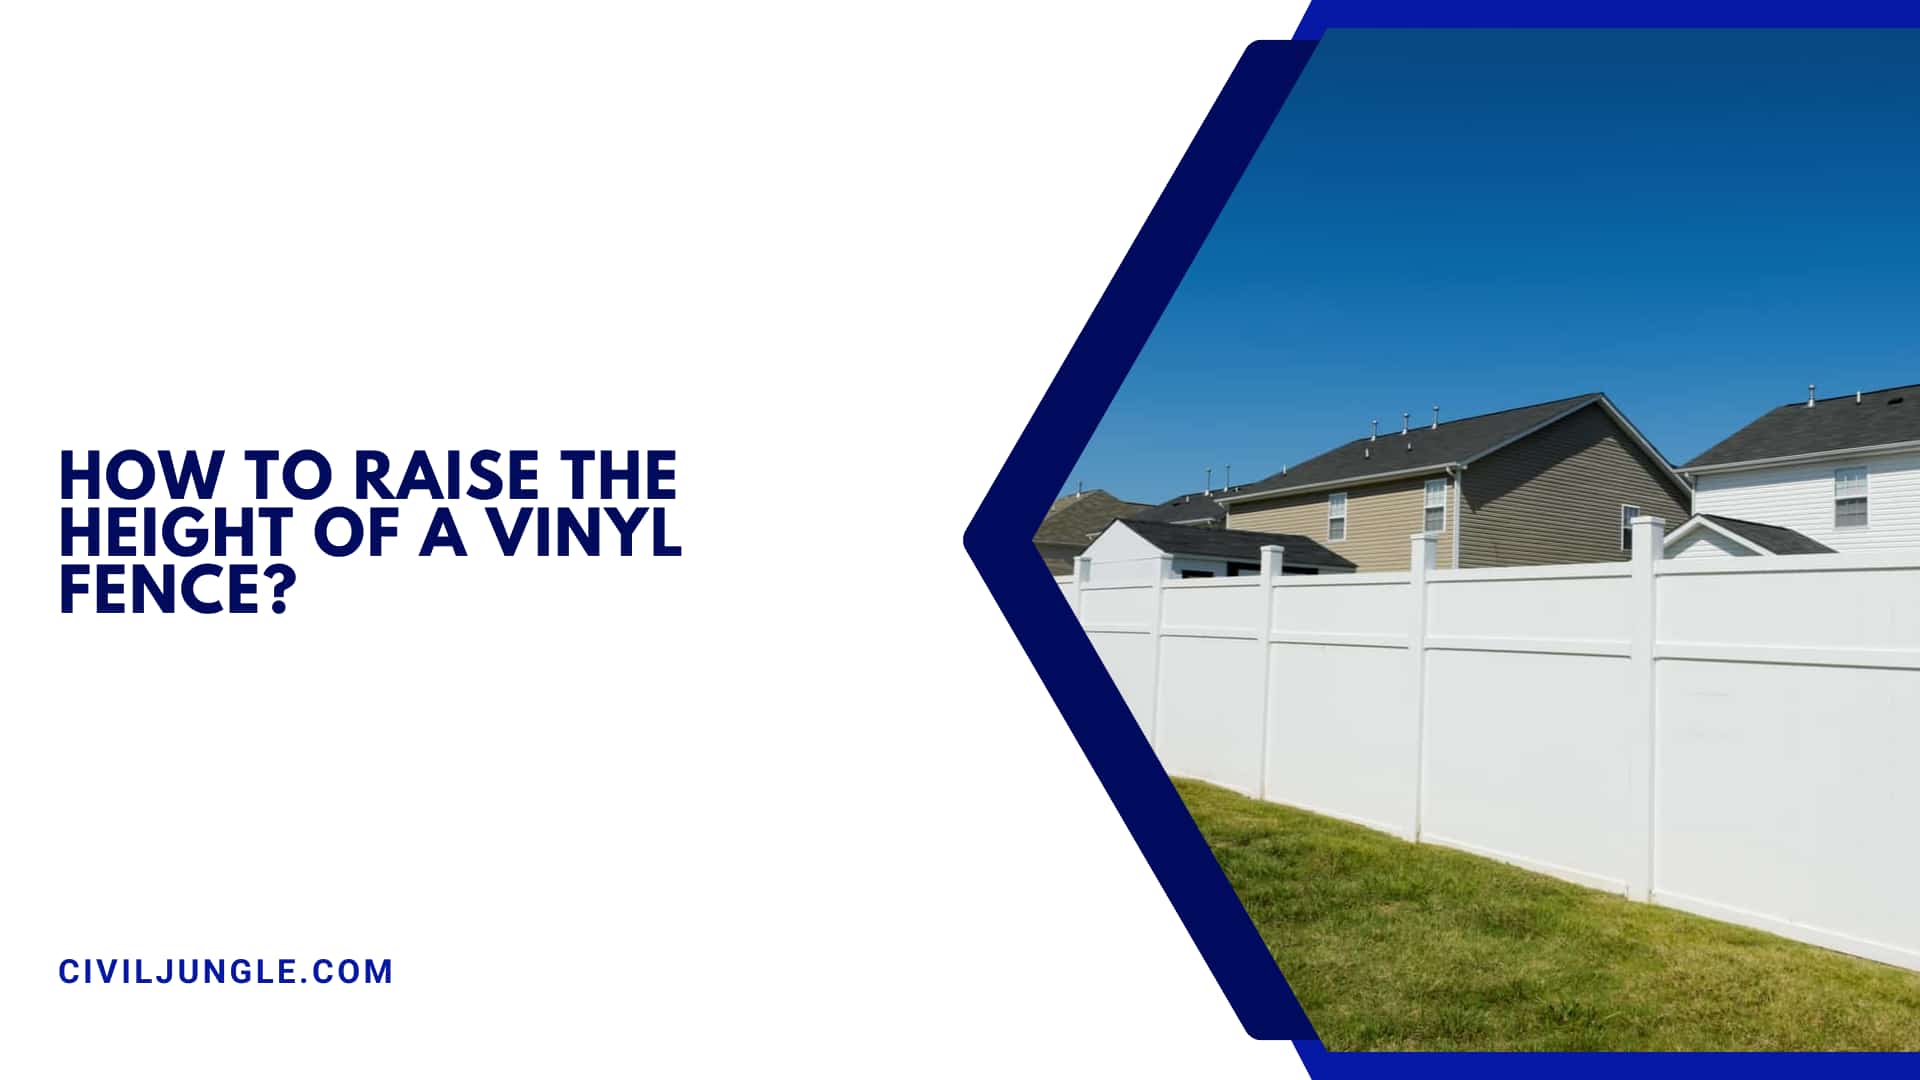 How to Raise the Height of a Vinyl Fence?